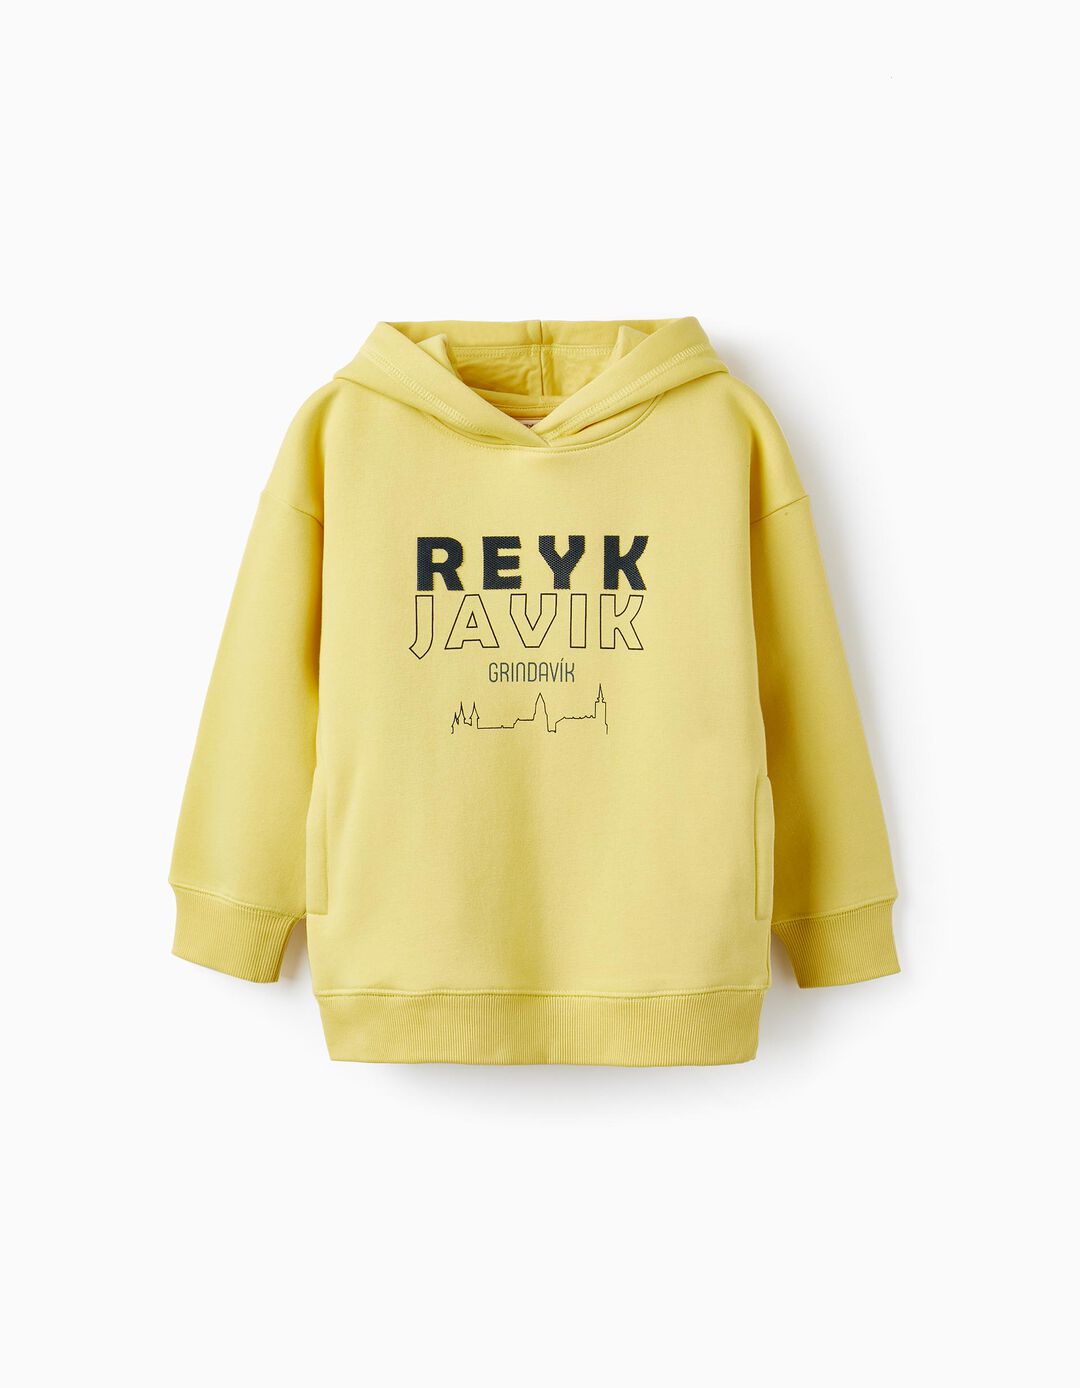 Hooded Sweatshirt in Cotton for Boys, Yellow